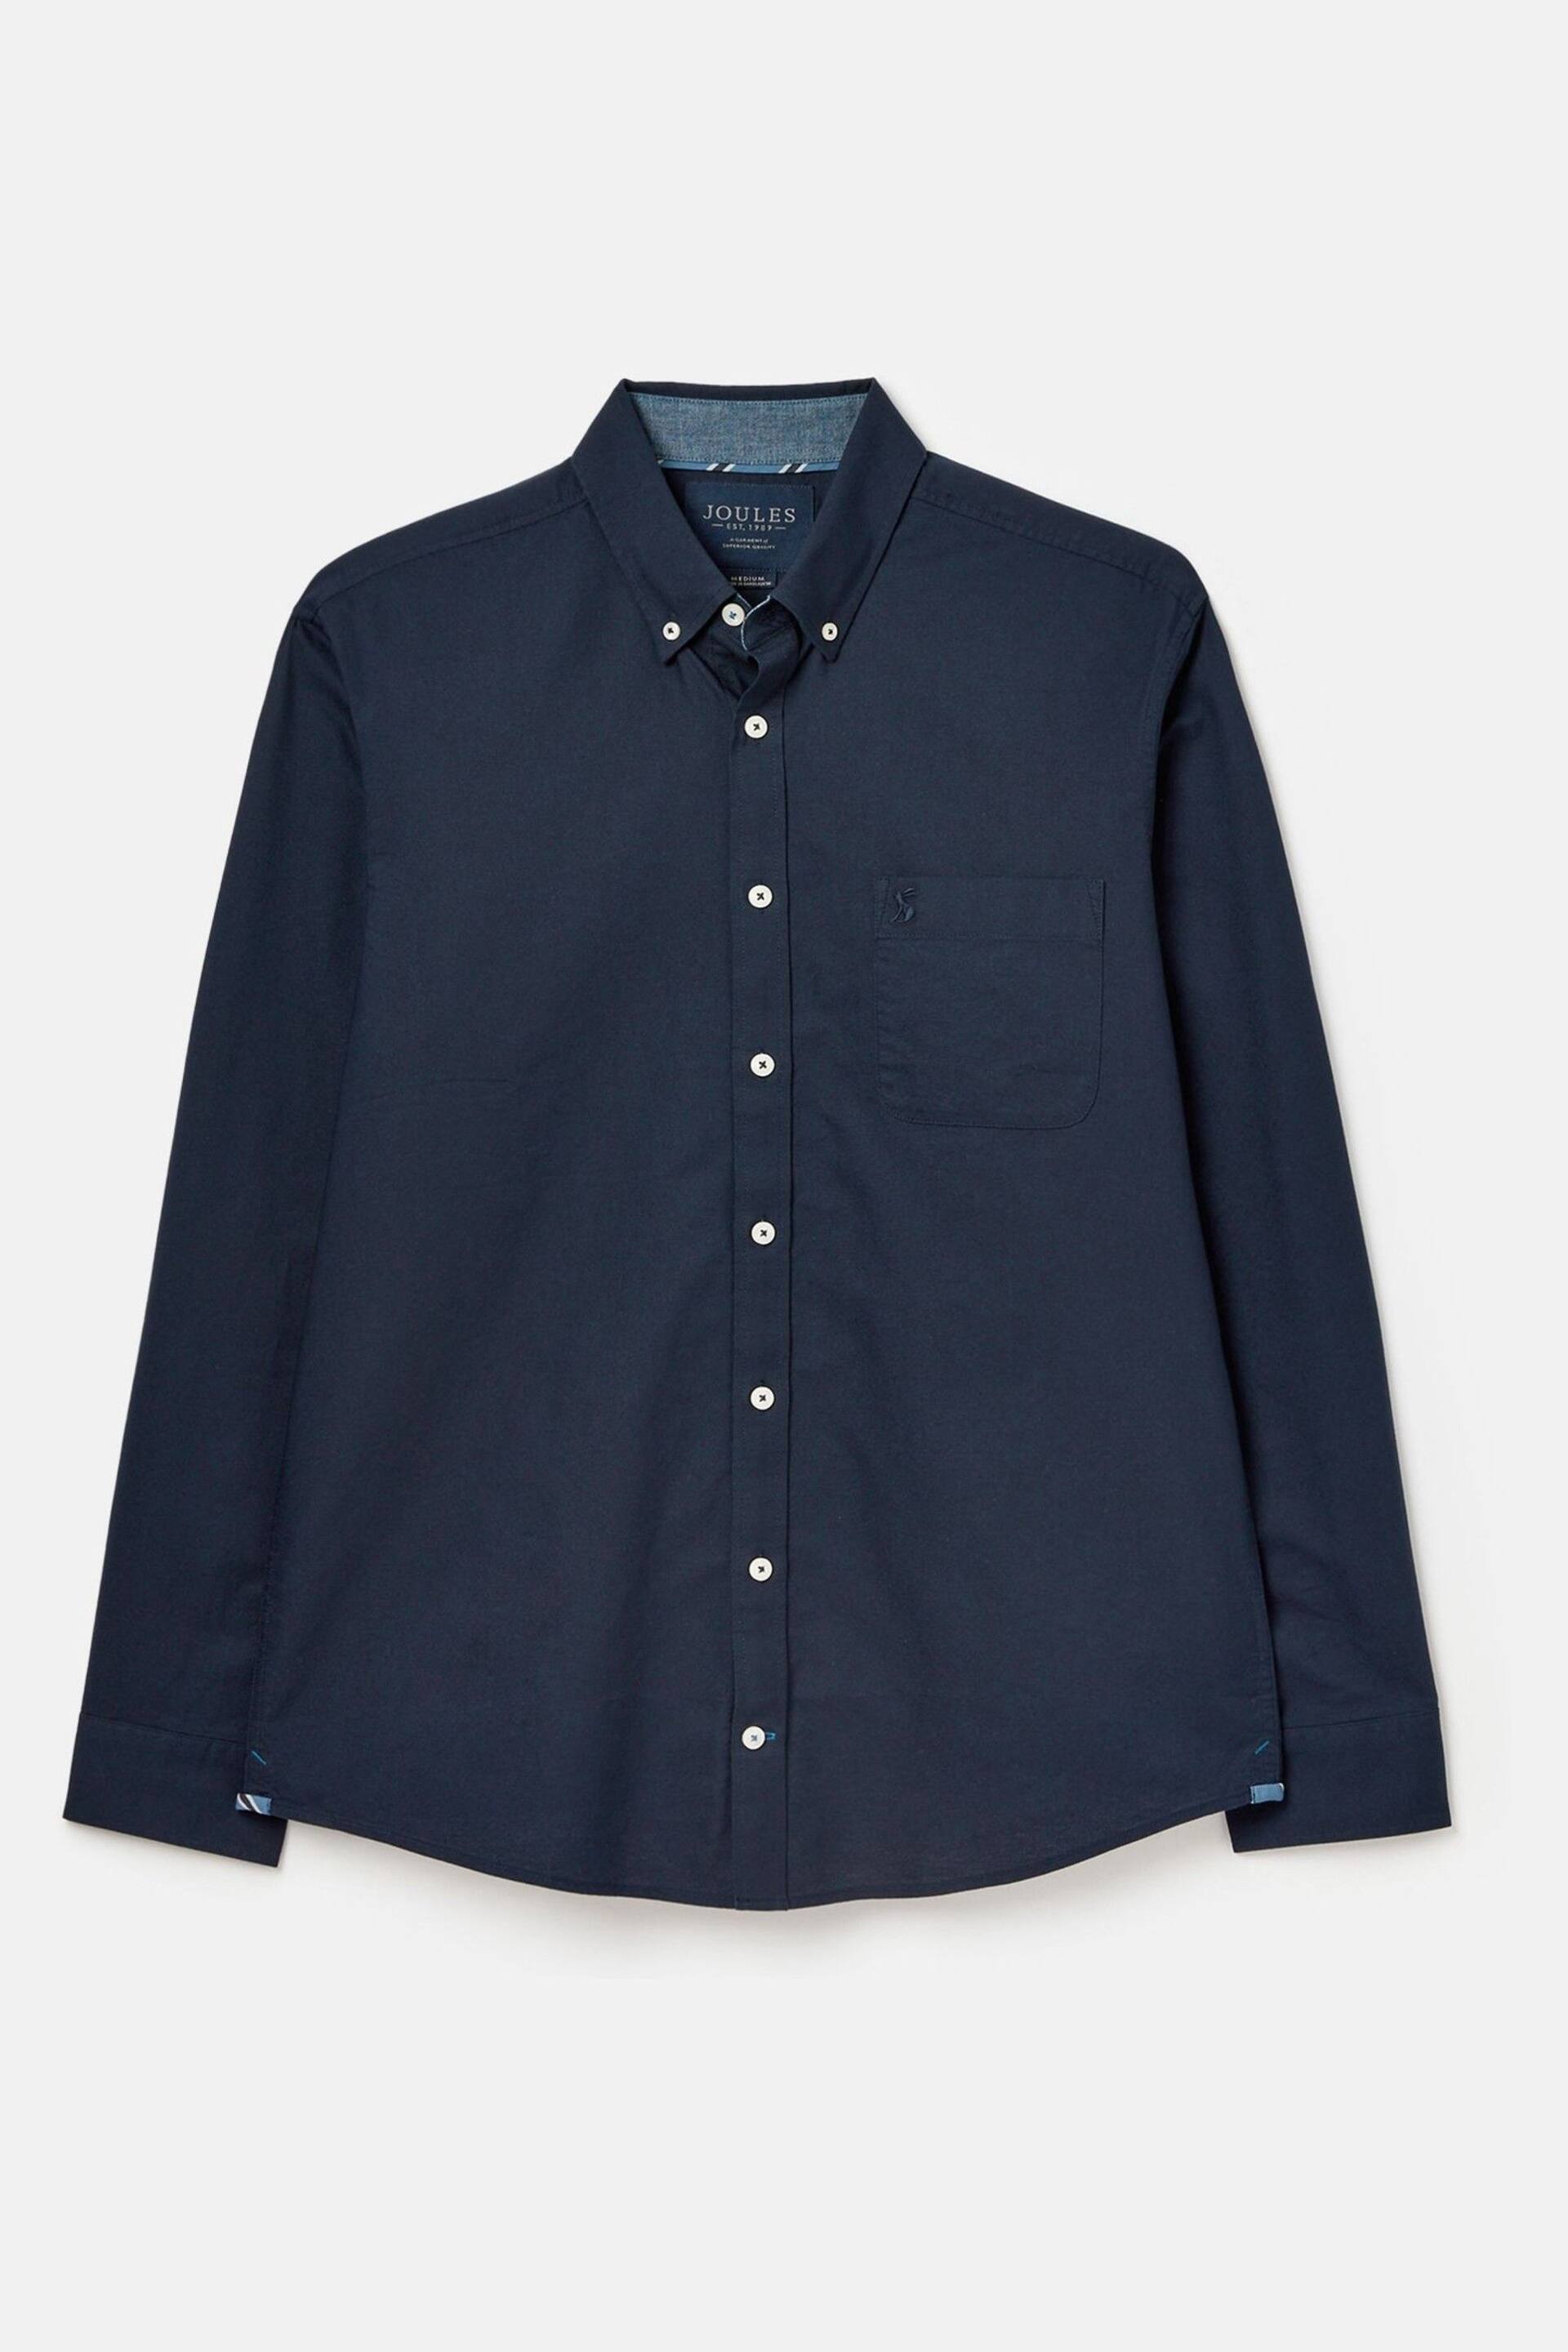 Joules Oxford Navy Blue Long Sleeve Oxford Shirt - Image 7 of 7